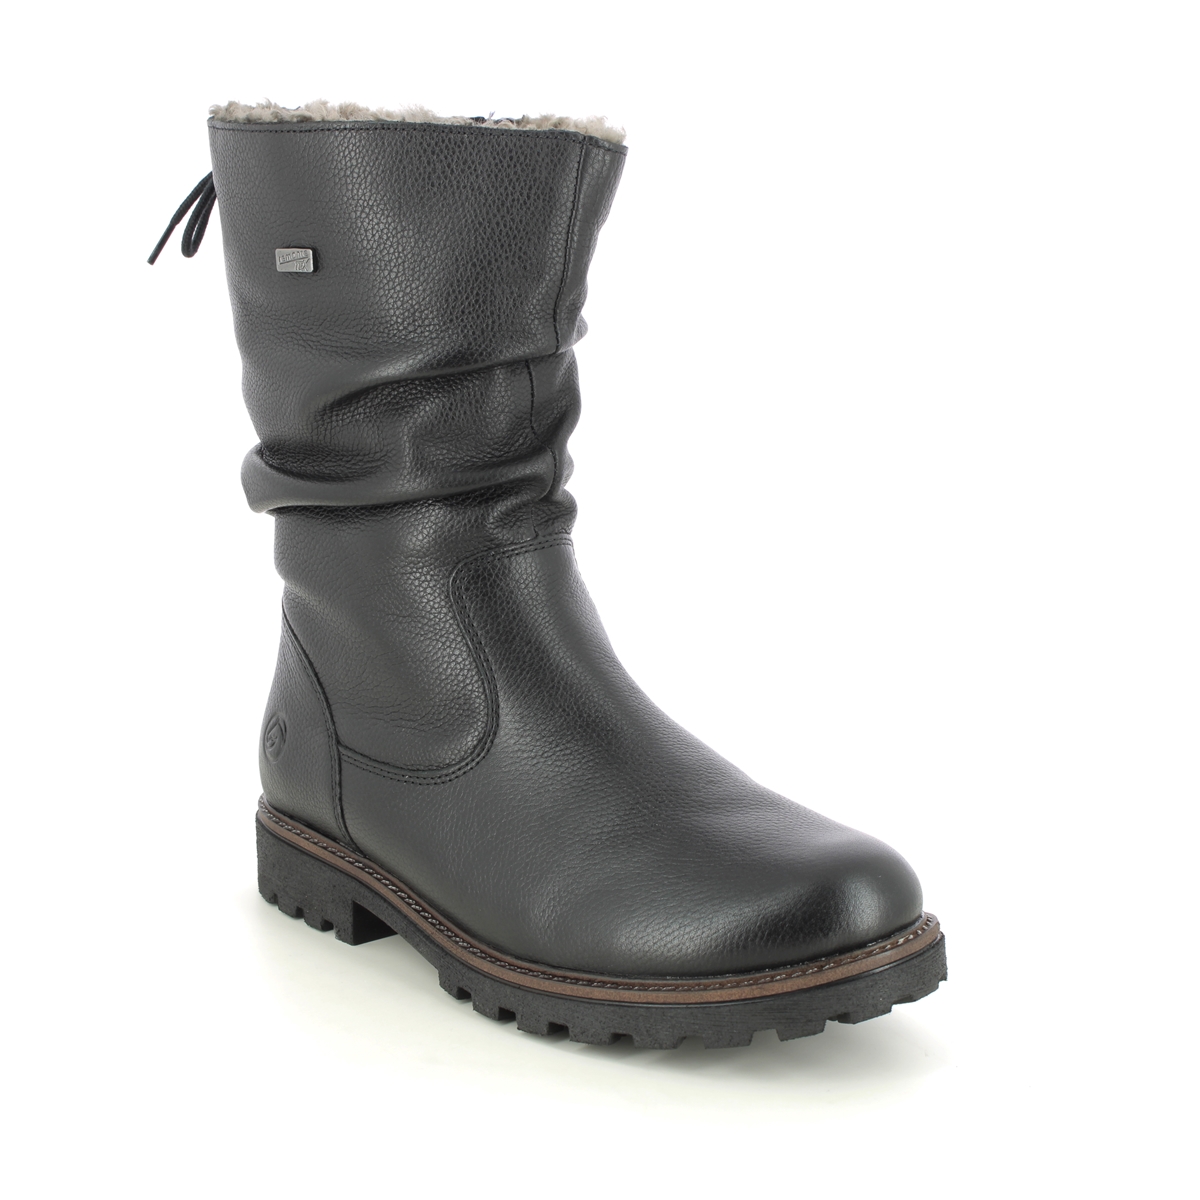 Remonte Brand Tex Sheep Black Leather Womens Mid Calf Boots D8477-01 In Size 38 In Plain Black Leather